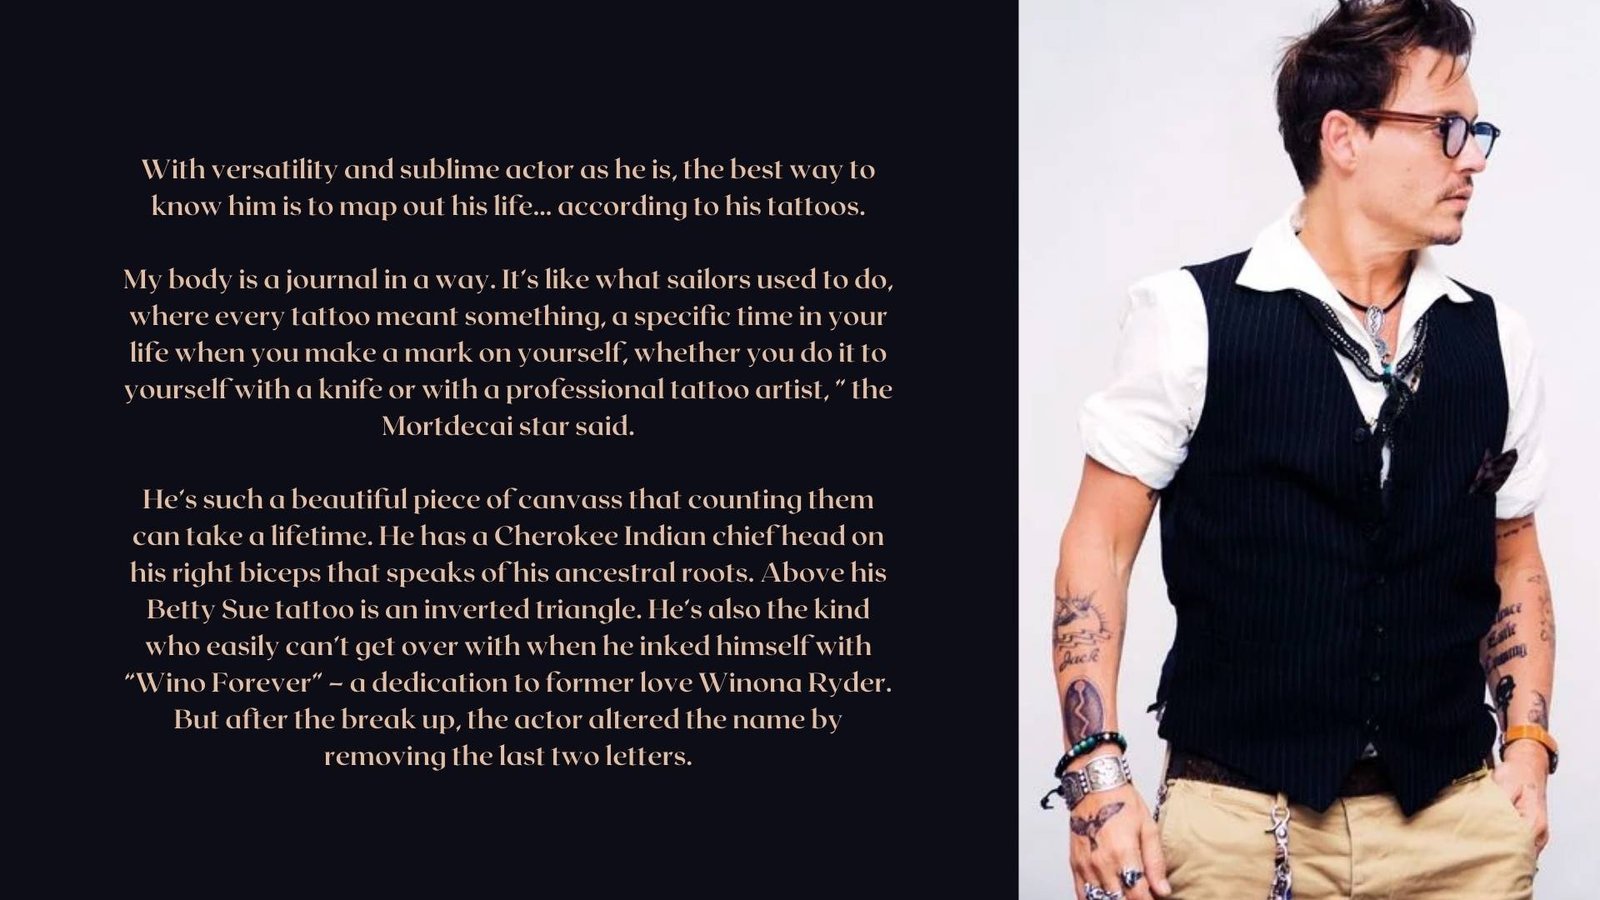 Johnny Depp’s Tattoos & Their Meanings